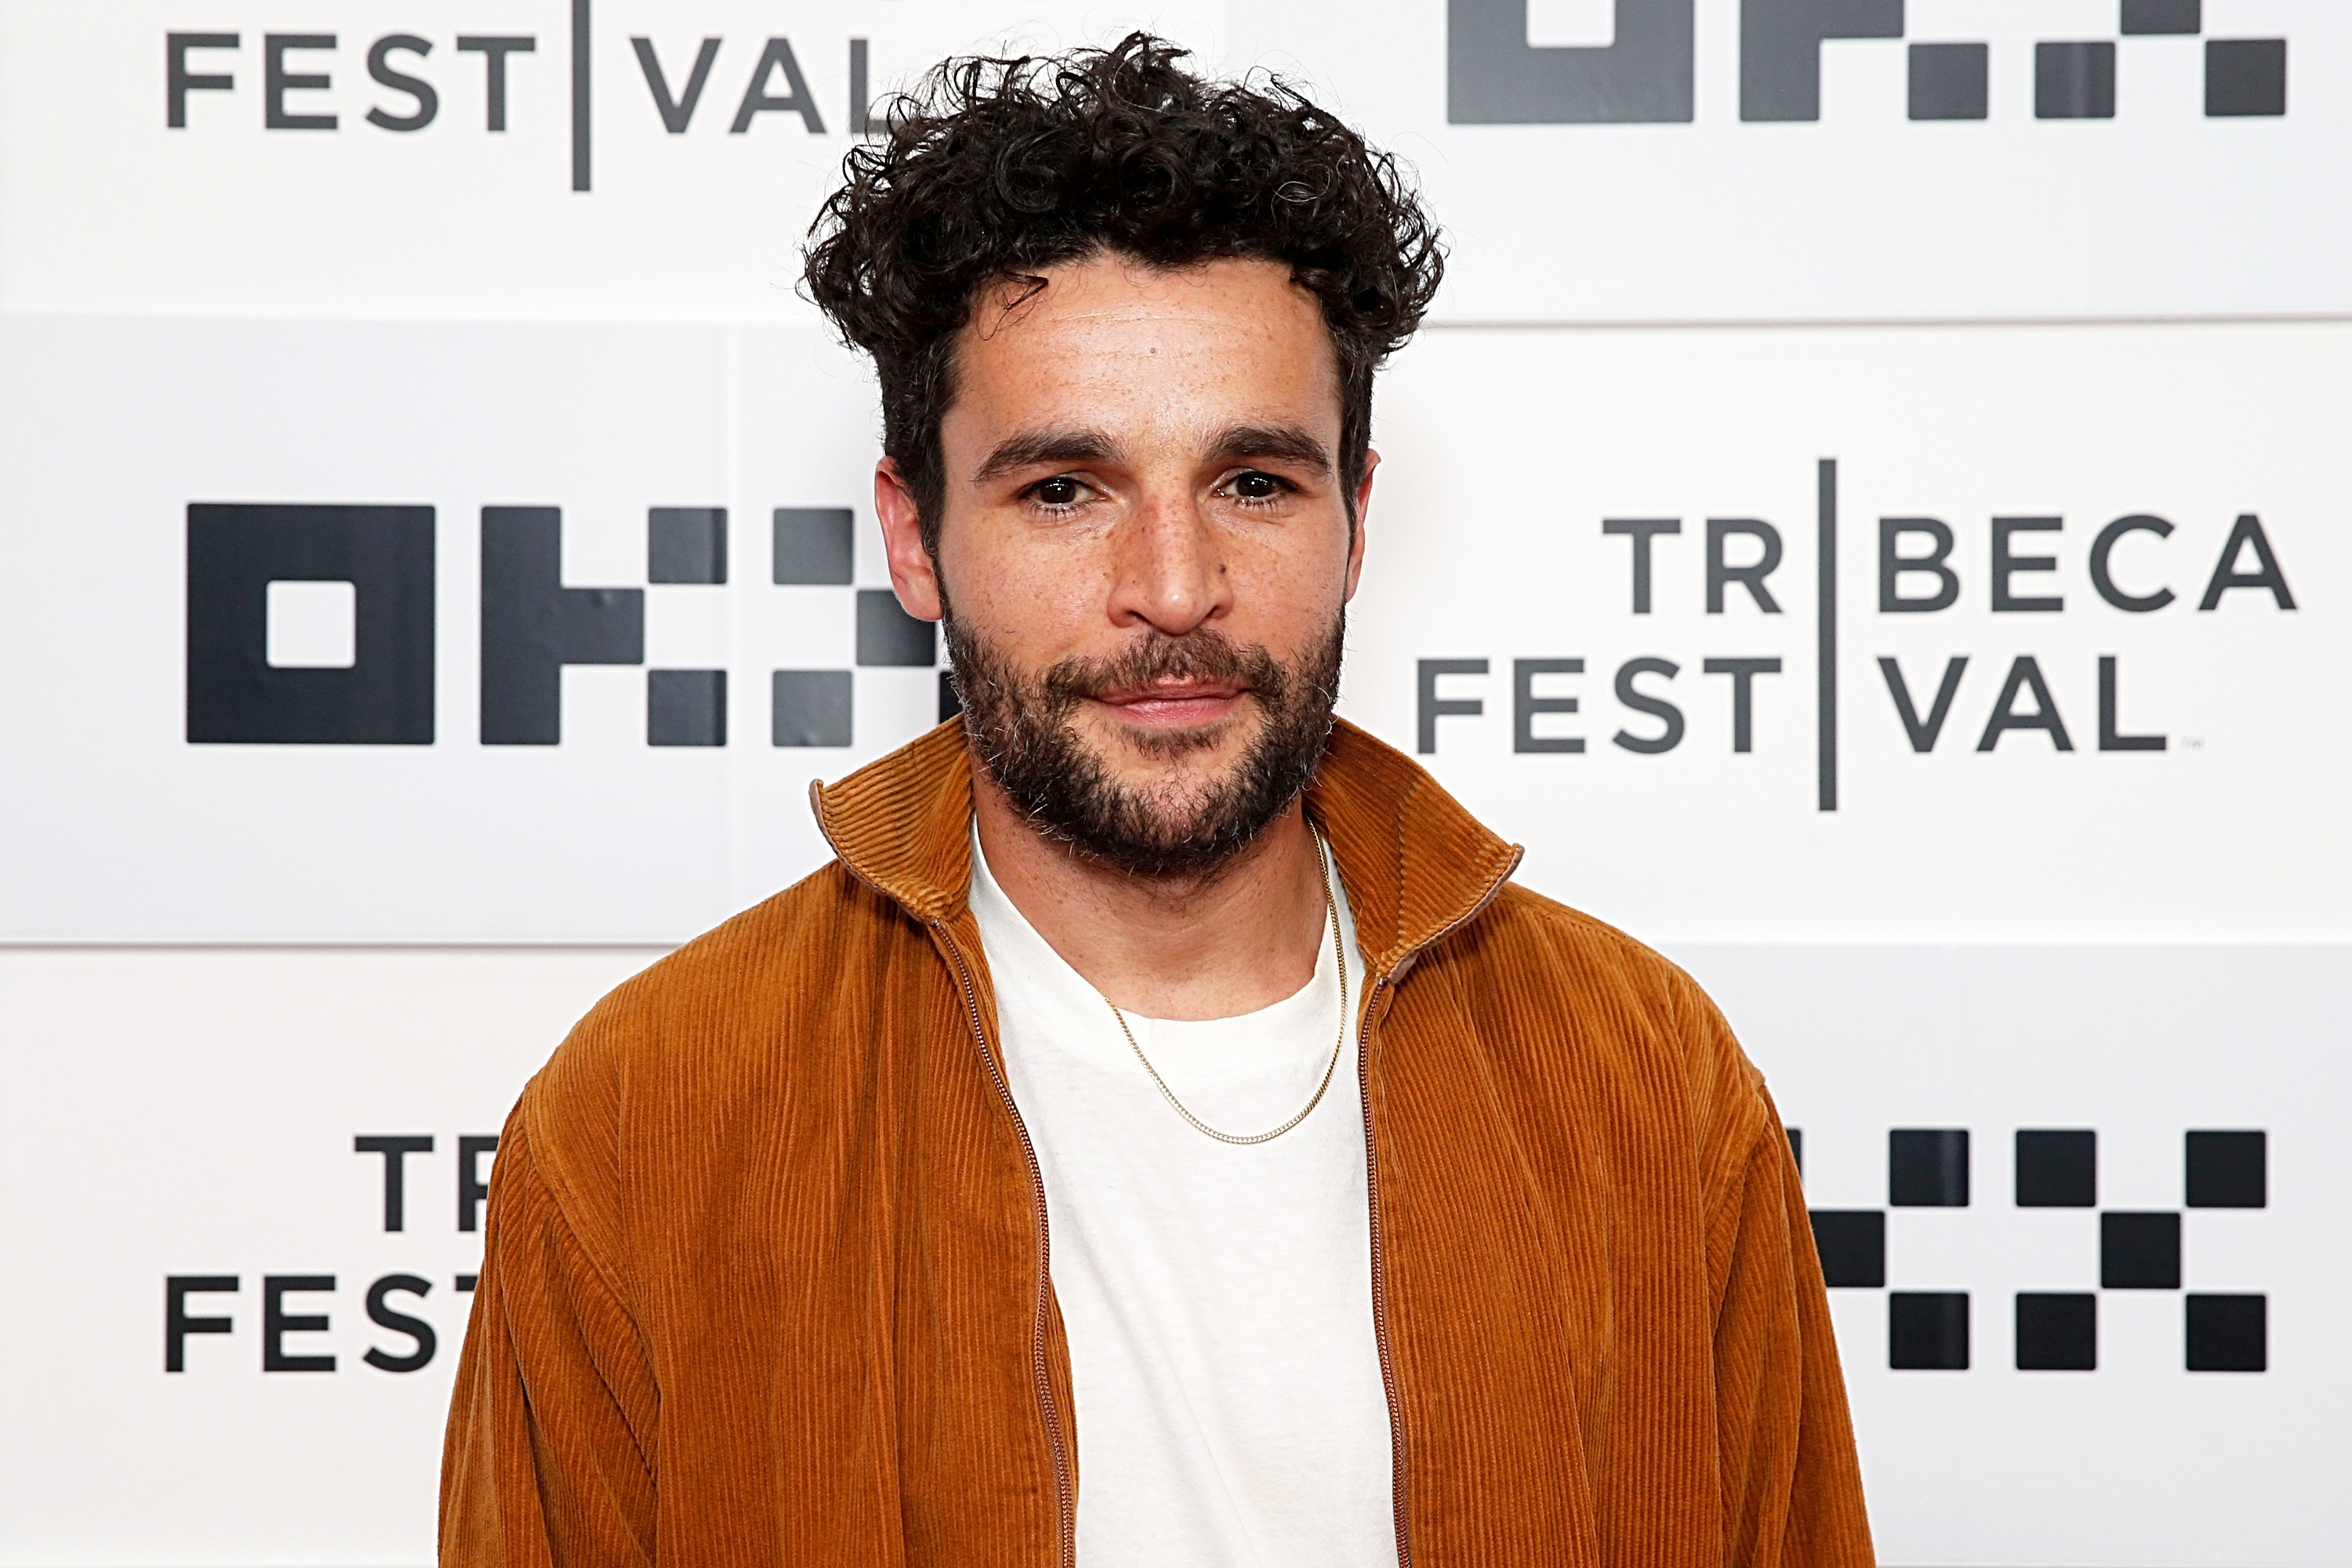 Christopher Abbott at the premiere of "The Forgiven" during the 2022 Tribeca Festival in New York City on June 14, 2022. | Source: Getty Images